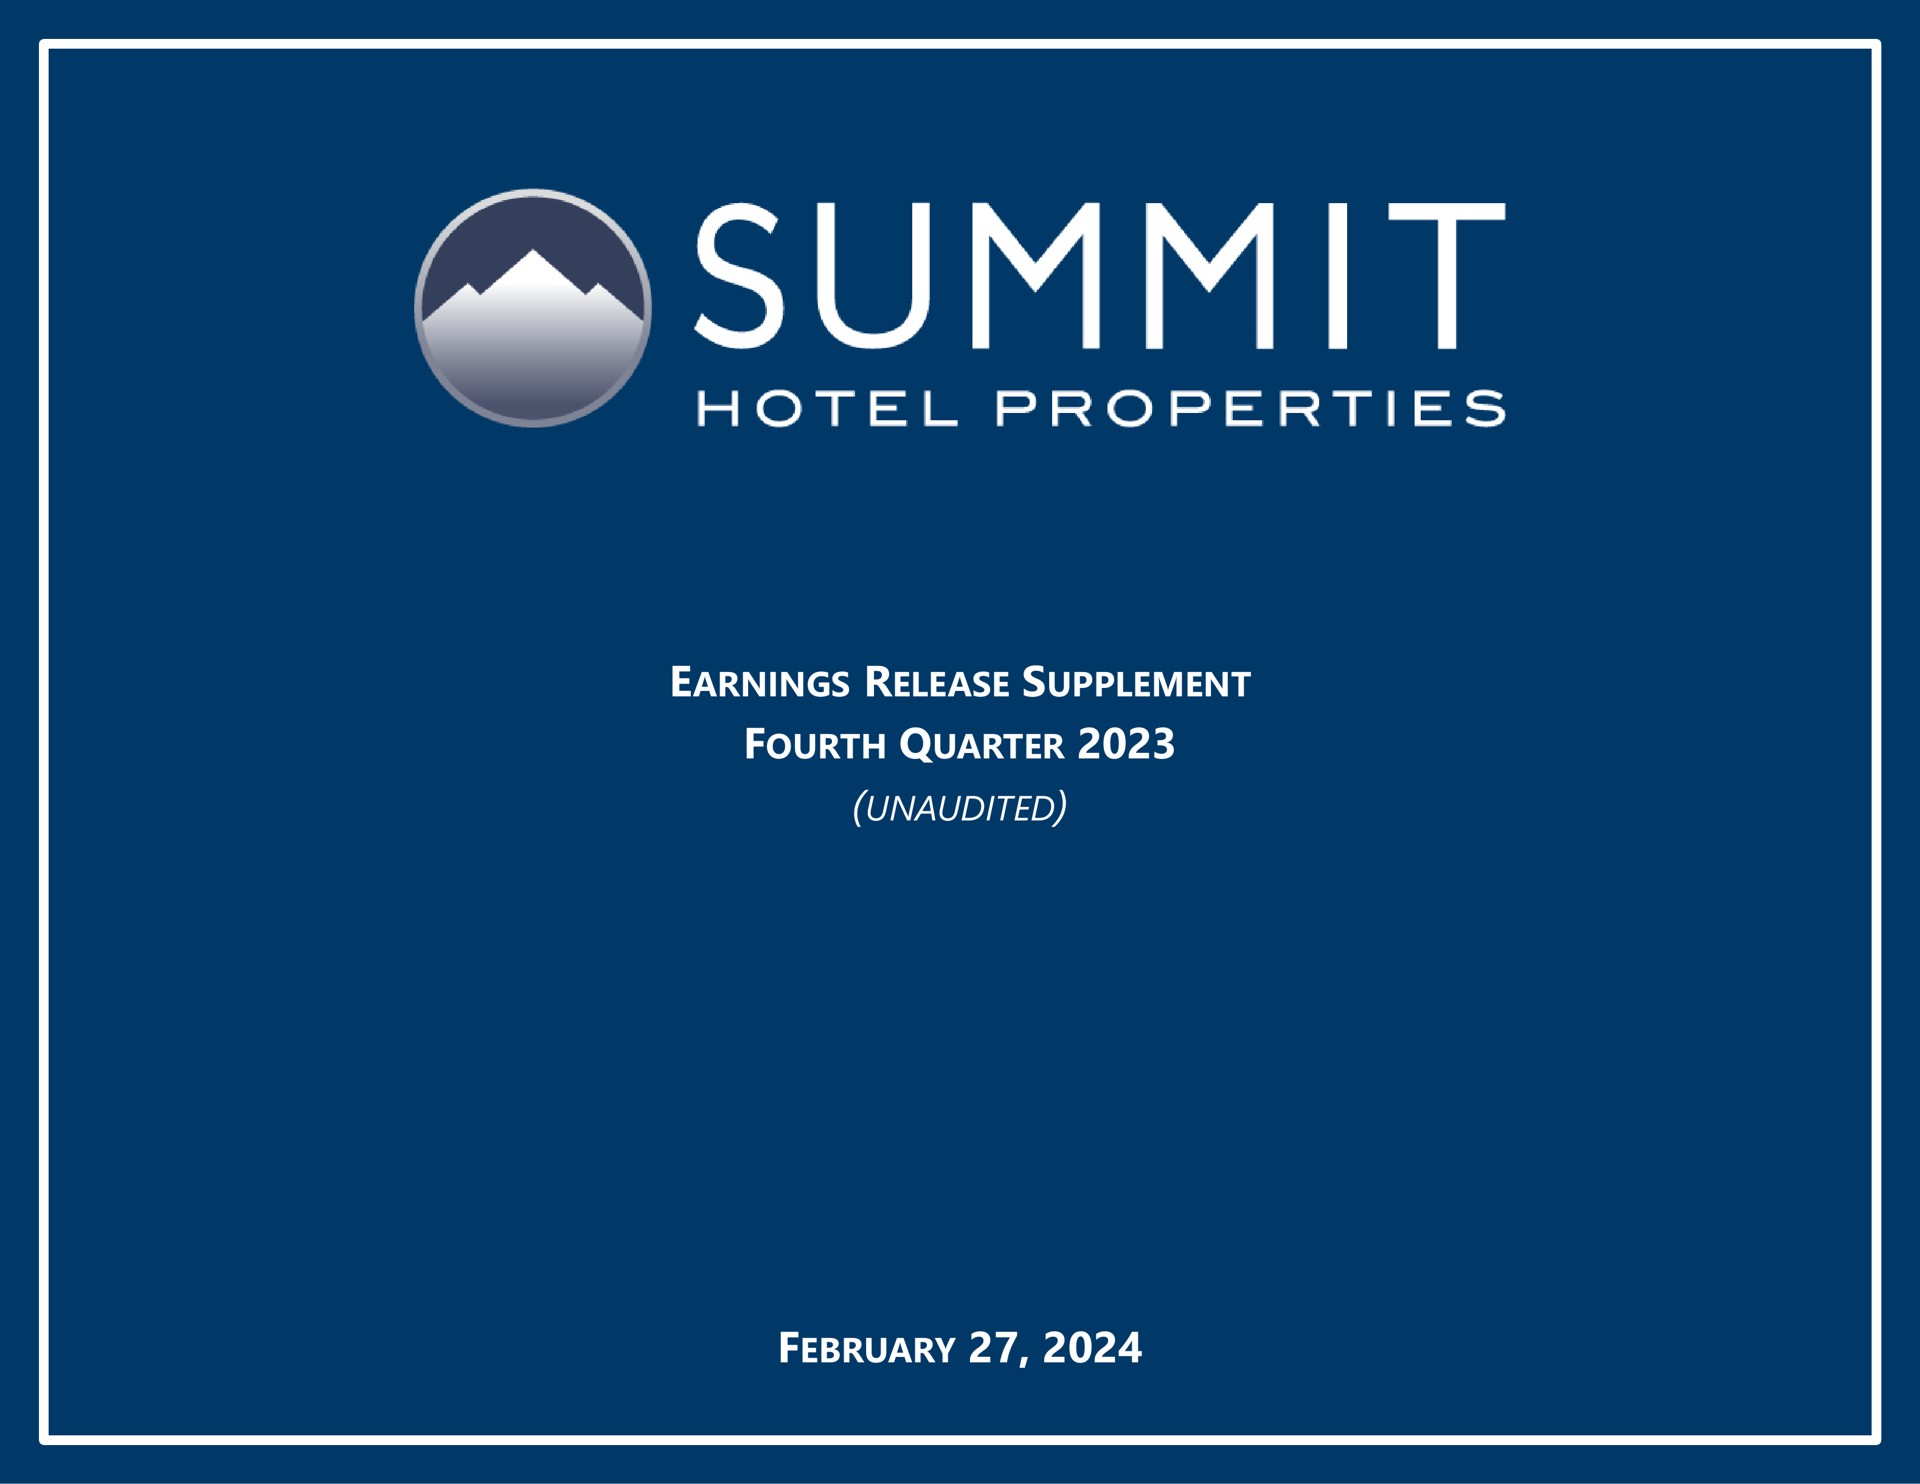 summit hotel properties earnings release supplement fourth quarter unaudited | Summit Hotel Properties